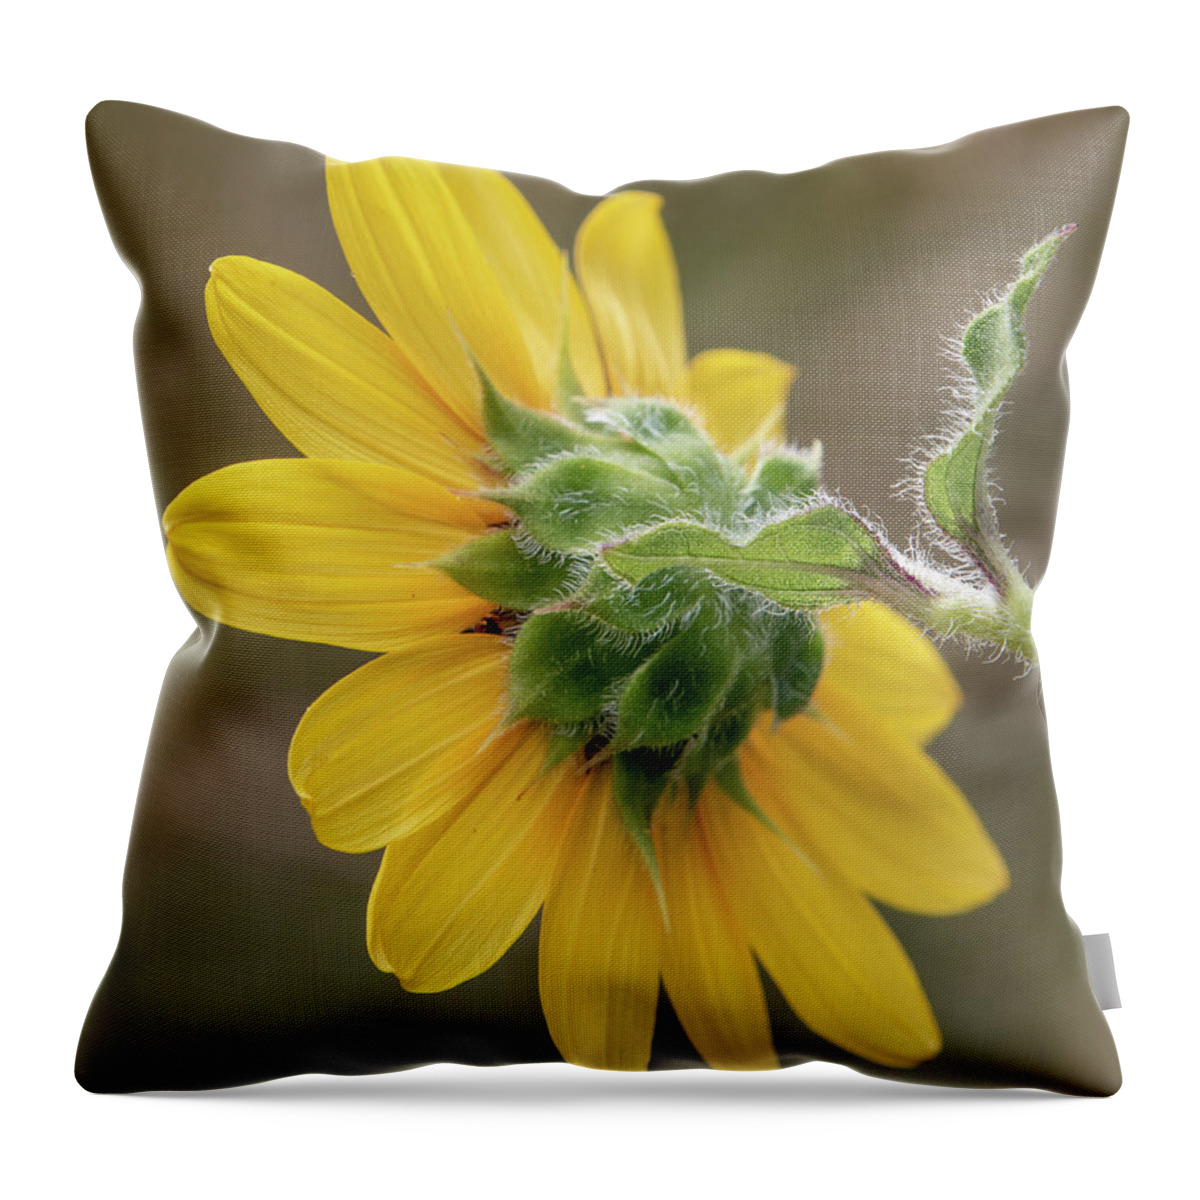 Beautiful Throw Pillow featuring the photograph Beauty From Behind by Teresa Wilson